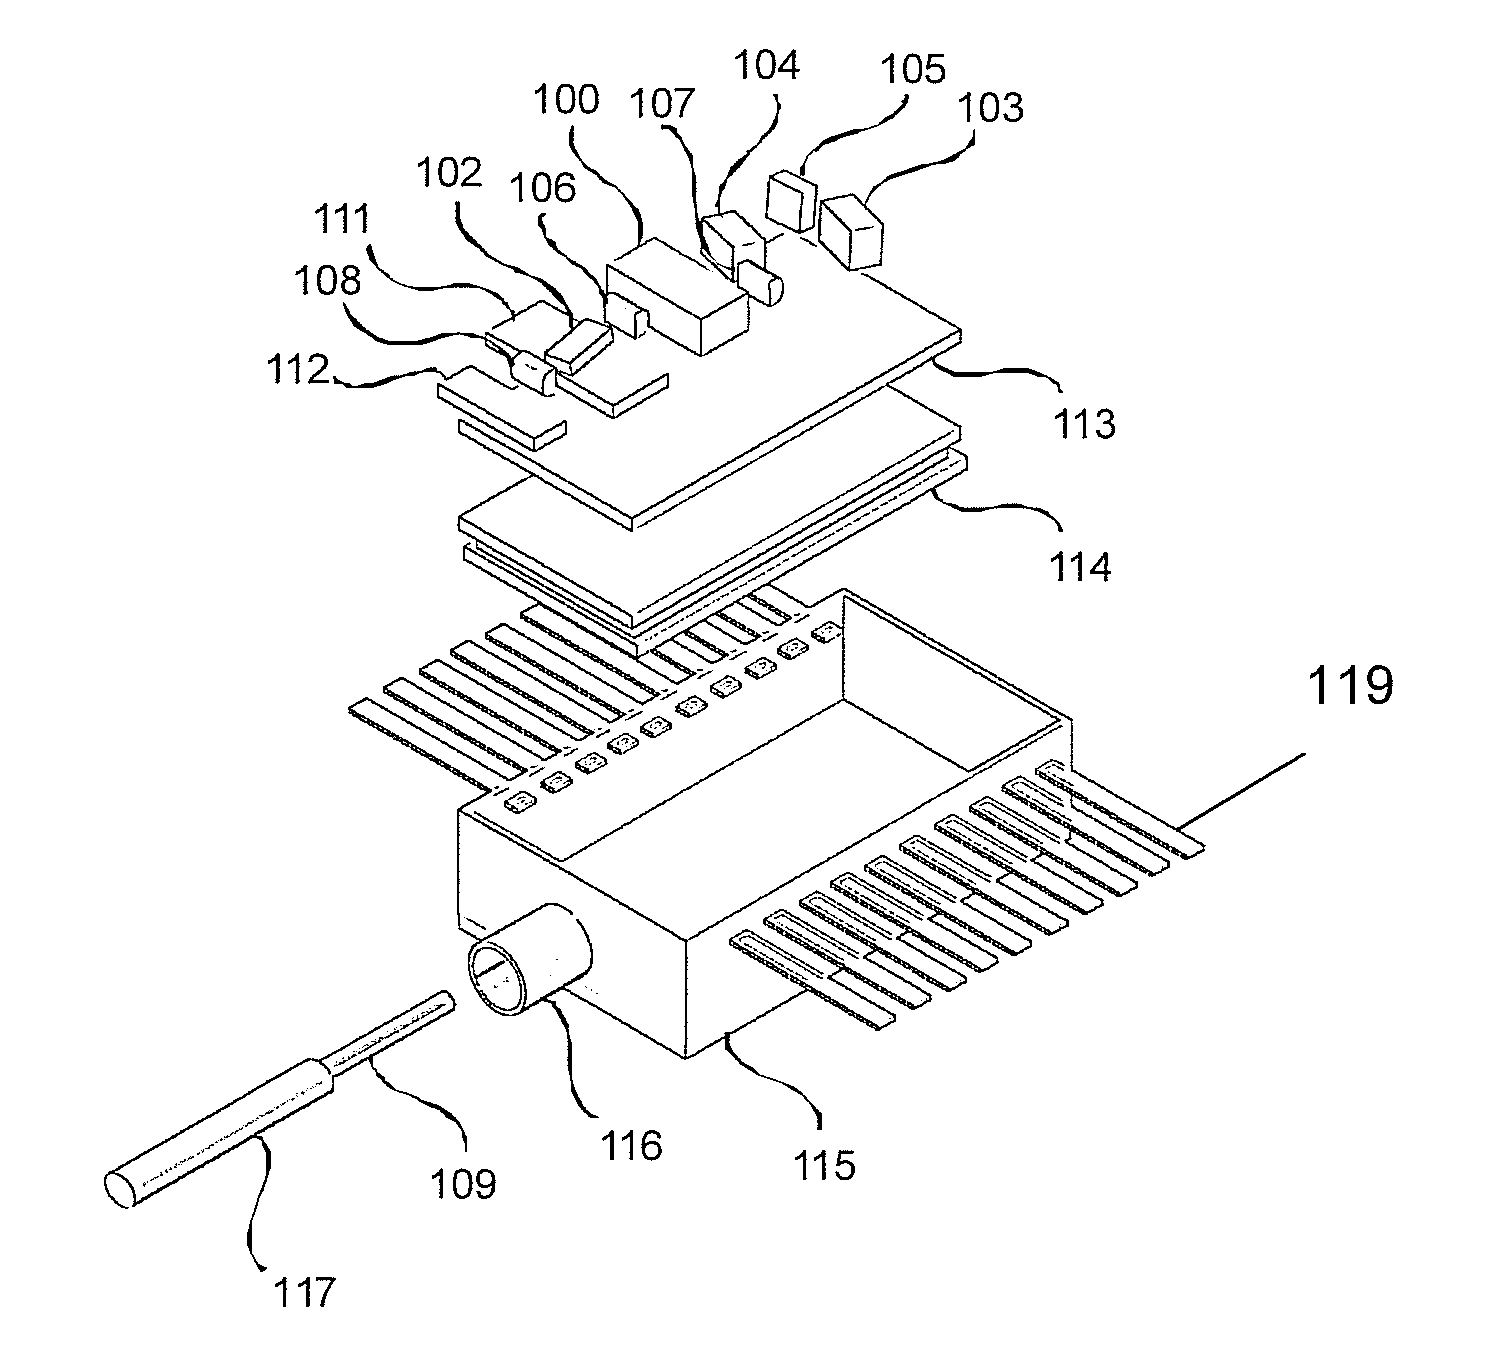 Light source, and optical coherence tomography module